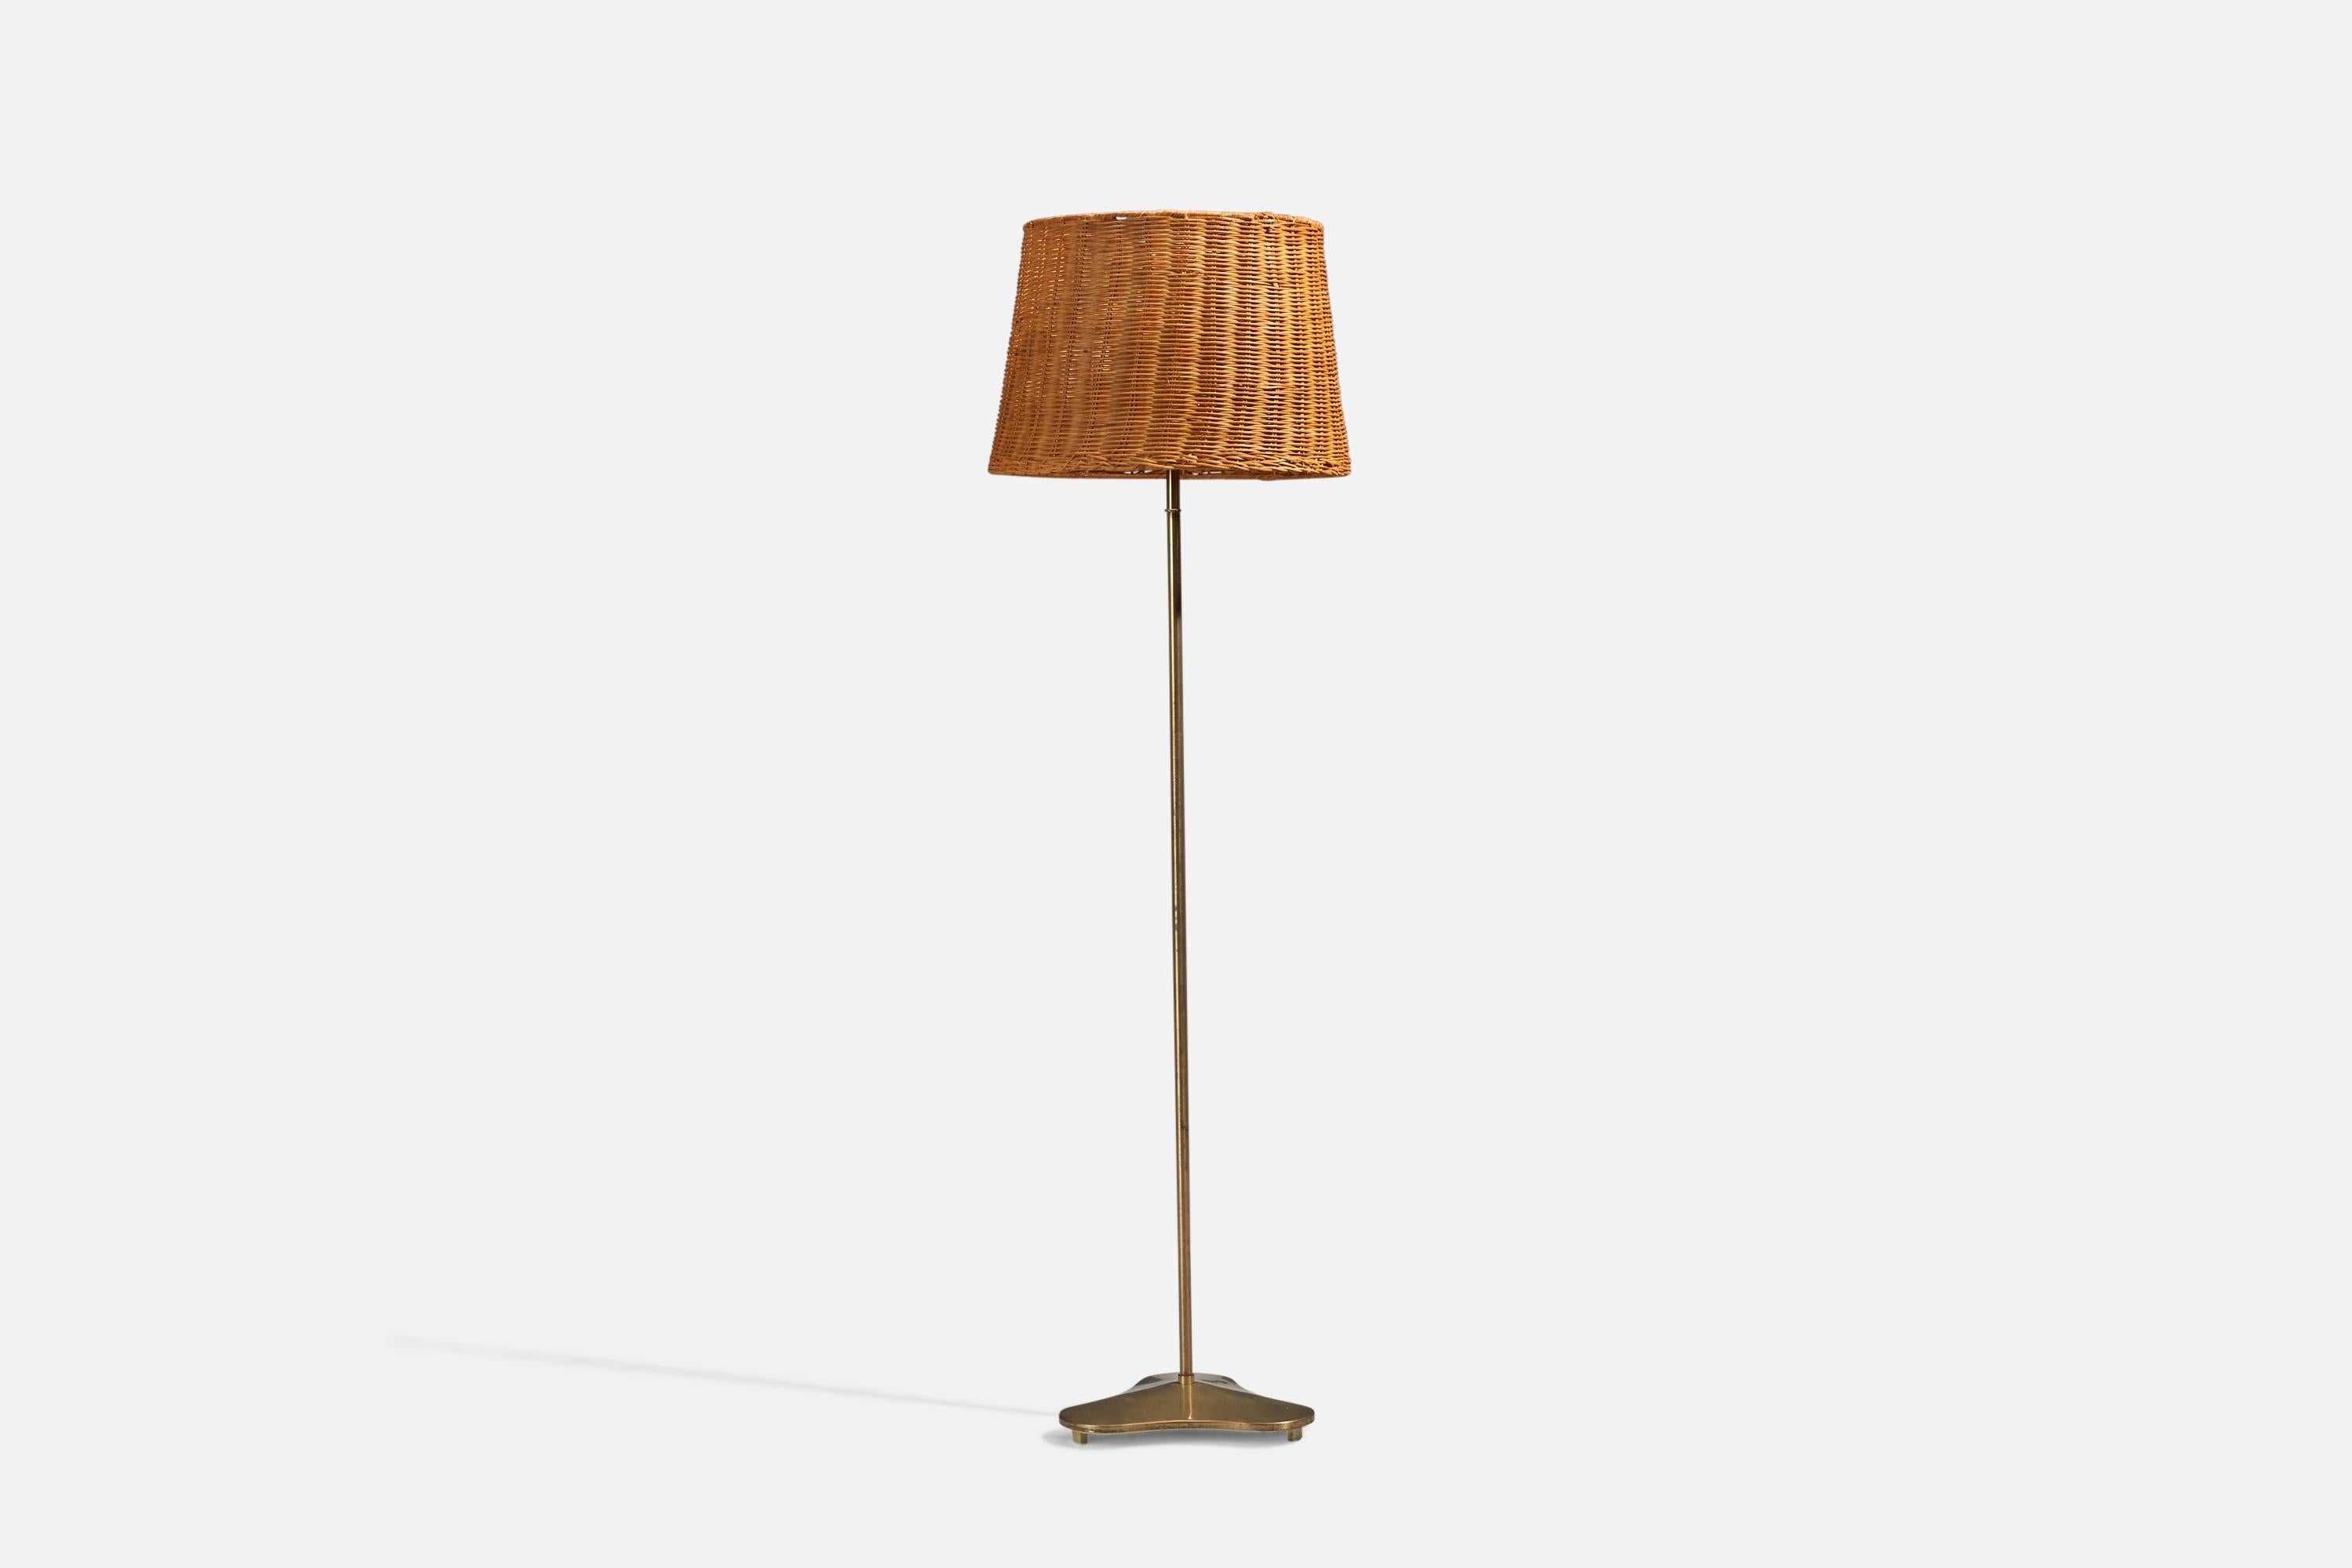 A brass and rattan floor lamp, design attributed to Hans Bergström and produced by ASEA, Sweden, 1940s.

Sold with Lampshade. Dimensions stated are of Floor Lamp with Lampshade. 

Socket takes standard E-26 medium base bulb.

There is no maximum